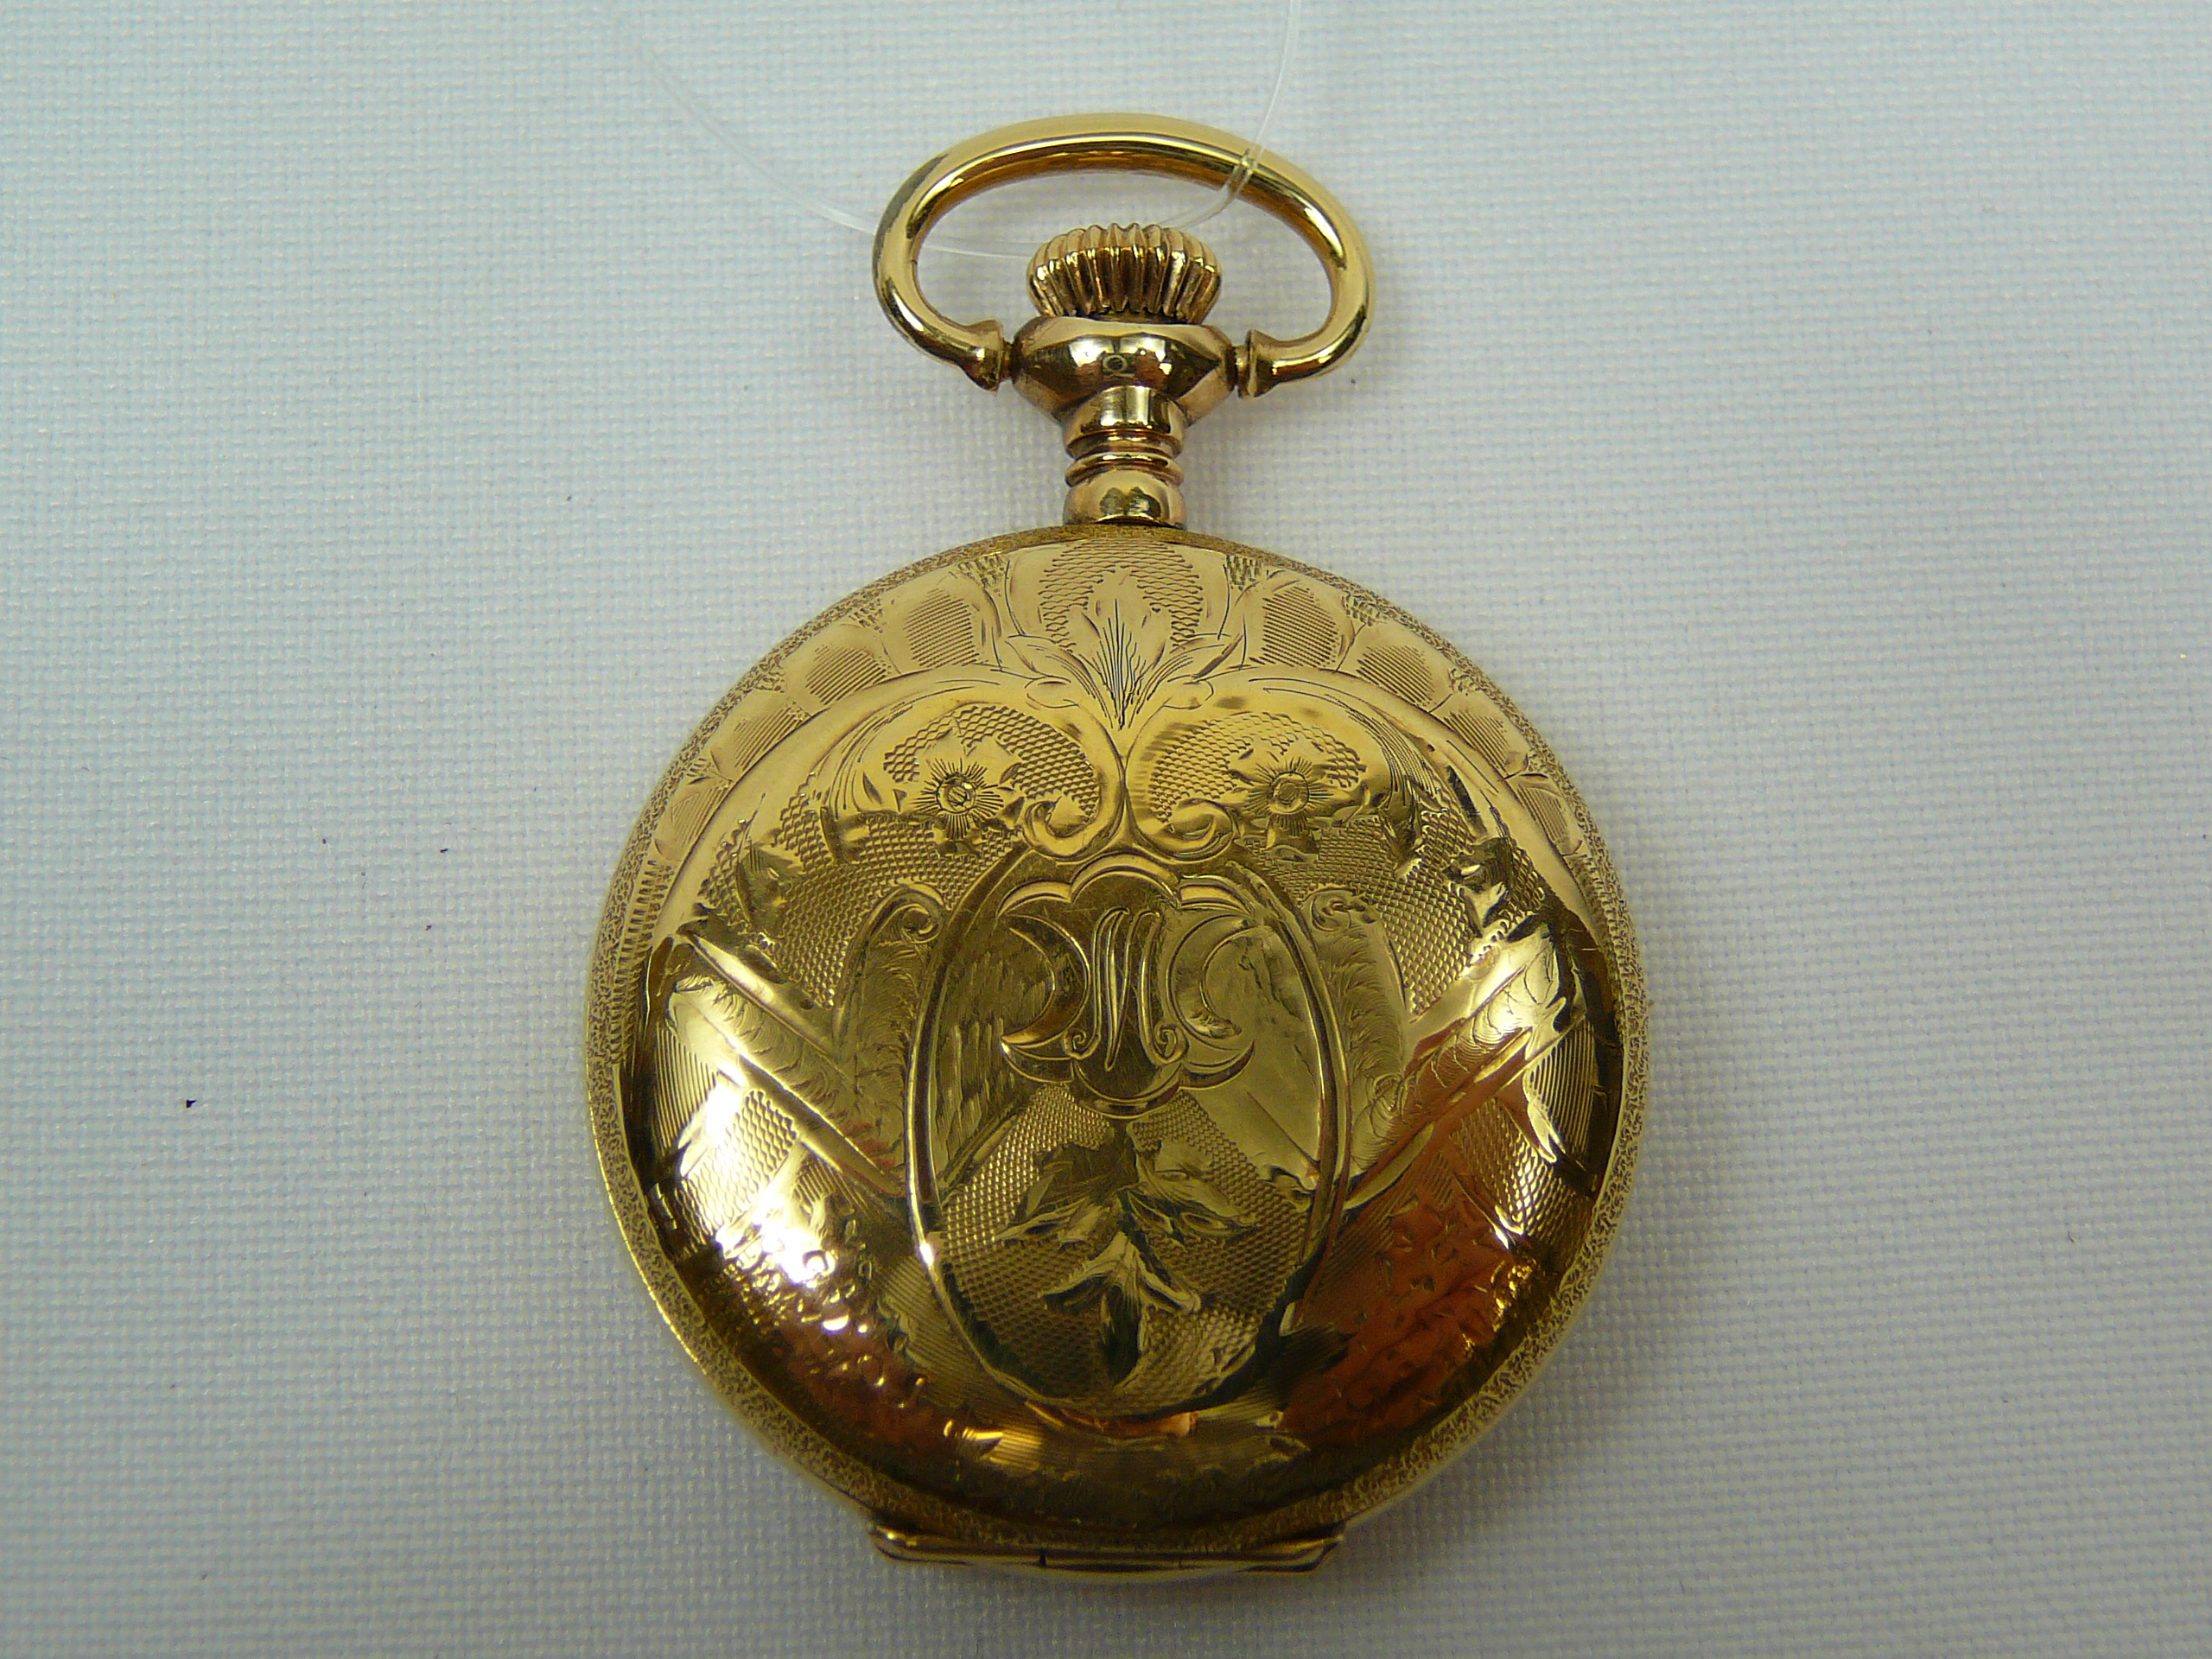 Ladies fob watch - Image 2 of 4